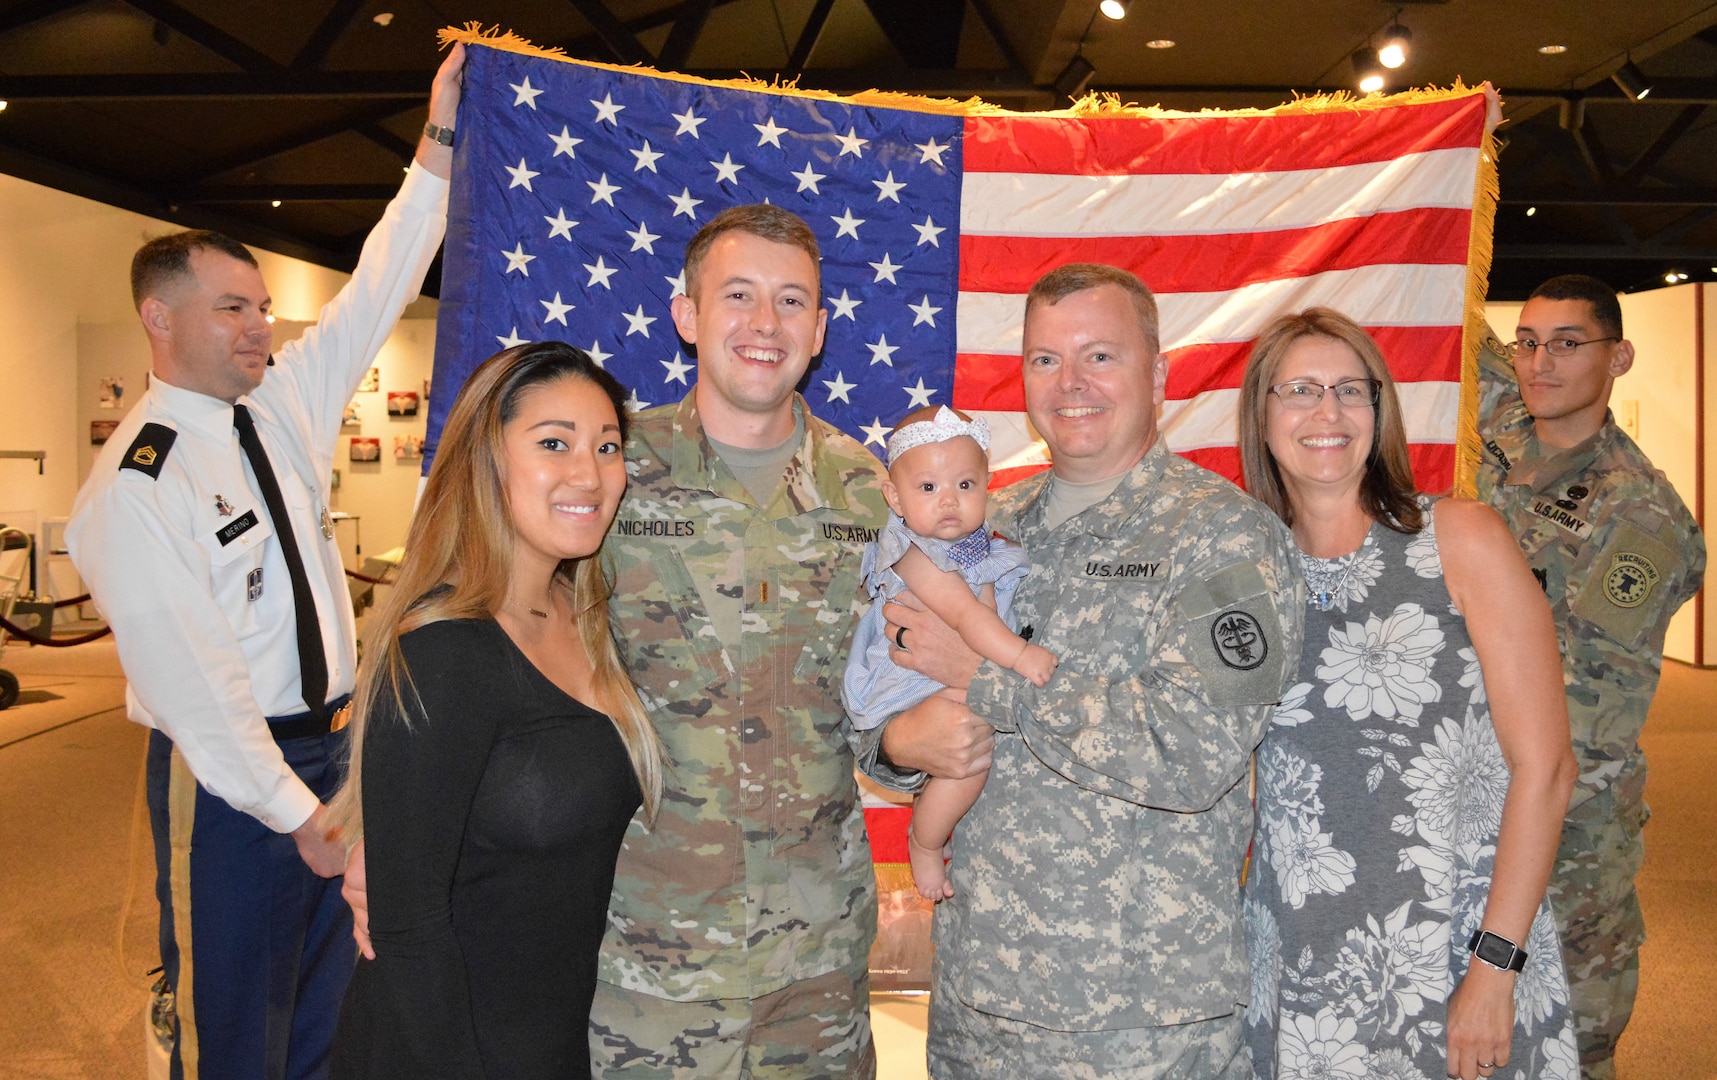 The Nicholes family poses following a commissioning ceremony July 20 at the Army Medicine Department Museum on Joint Base San Antonio-Fort Sam Houston, Texas, where Army 2nd Lt. Marc A. Nicholes (center left) administered the oath of office to swear-in his father, Army Reserve Lt. Col. Andrew “Andy” Nicholes (center right).  They are joined by (l. to r.) Army Sgt. 1st Class Irvin Merino, a health care recruiter with the Army Medical Recruiting Station Houston, Marc’s wife, Kelly, Andy’s wife, Lorraine, and Staff Sgt. Joel Ocasio, a health care recruiter with the Army Medical Recruiting Station Houston.